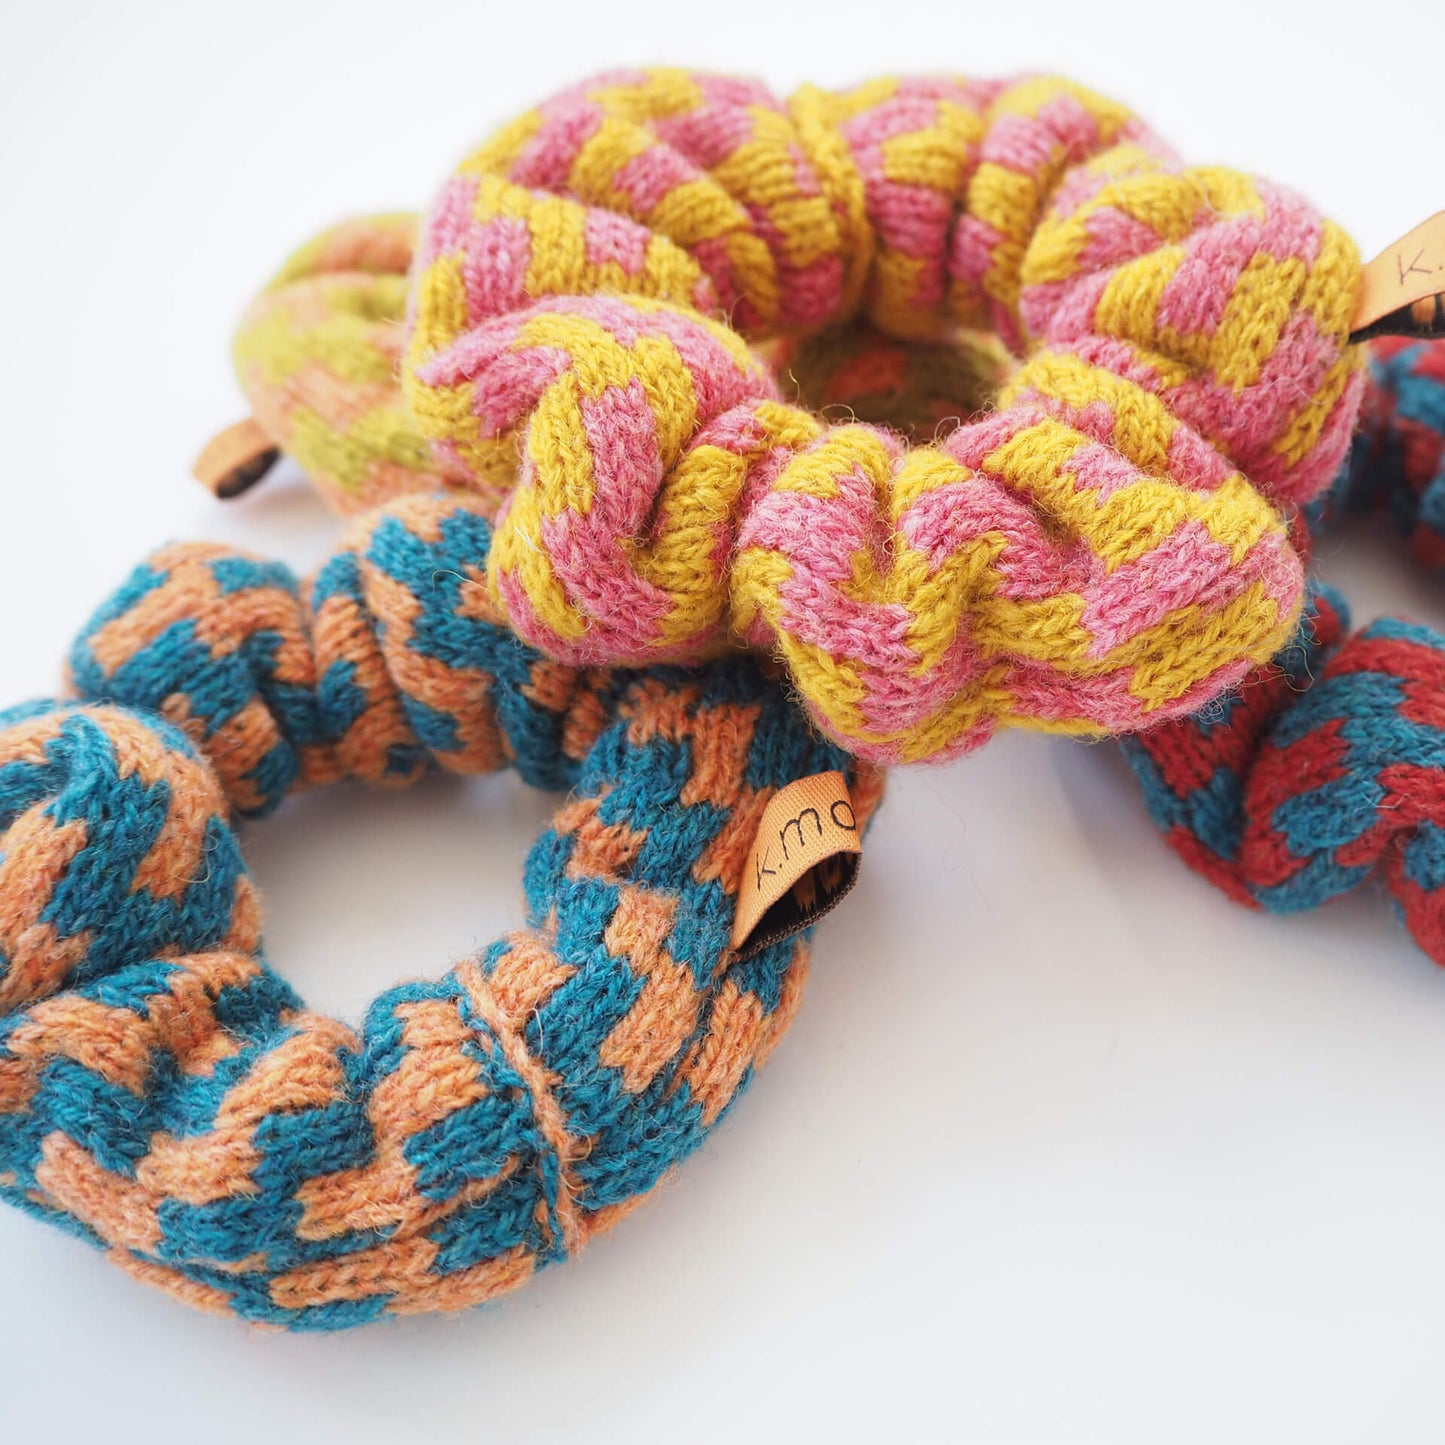 A pile of colourful knitted scrunchies with a thick zig-zag pattern, by K.Moods. They are red, yellow, blue, lime, pink, and orange.